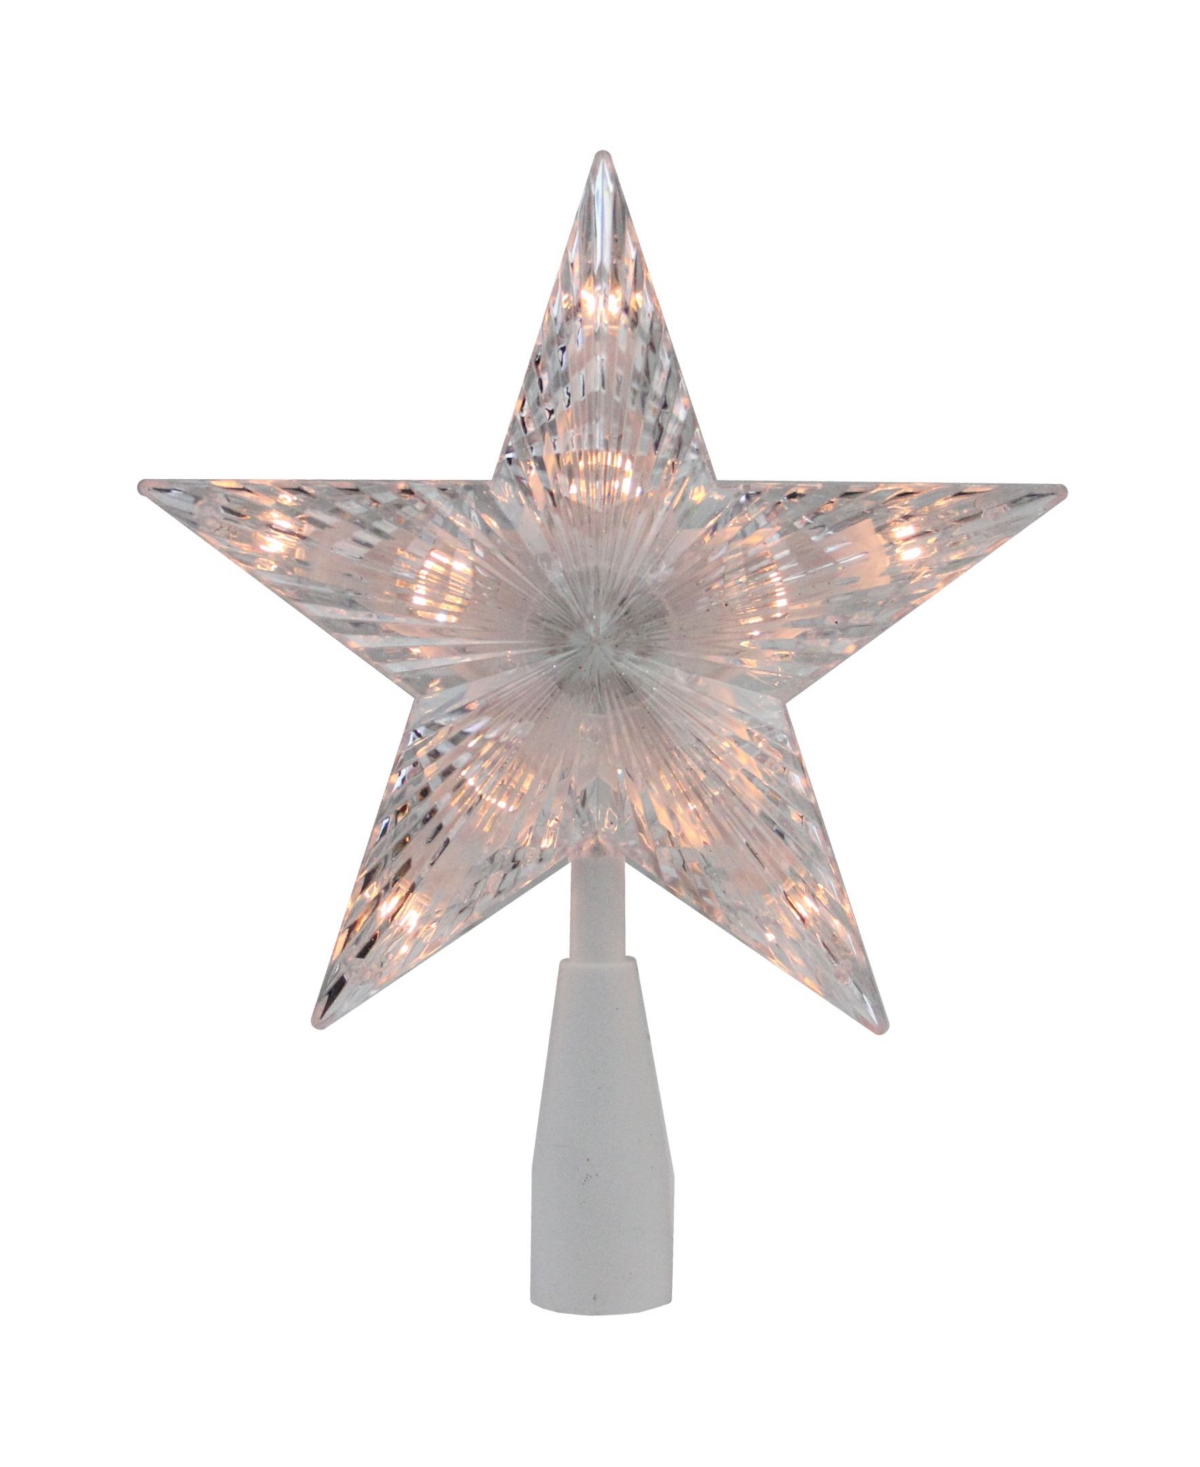 7" Traditional 5-Point Star Christmas Tree Topper - Clear Lights - Clear